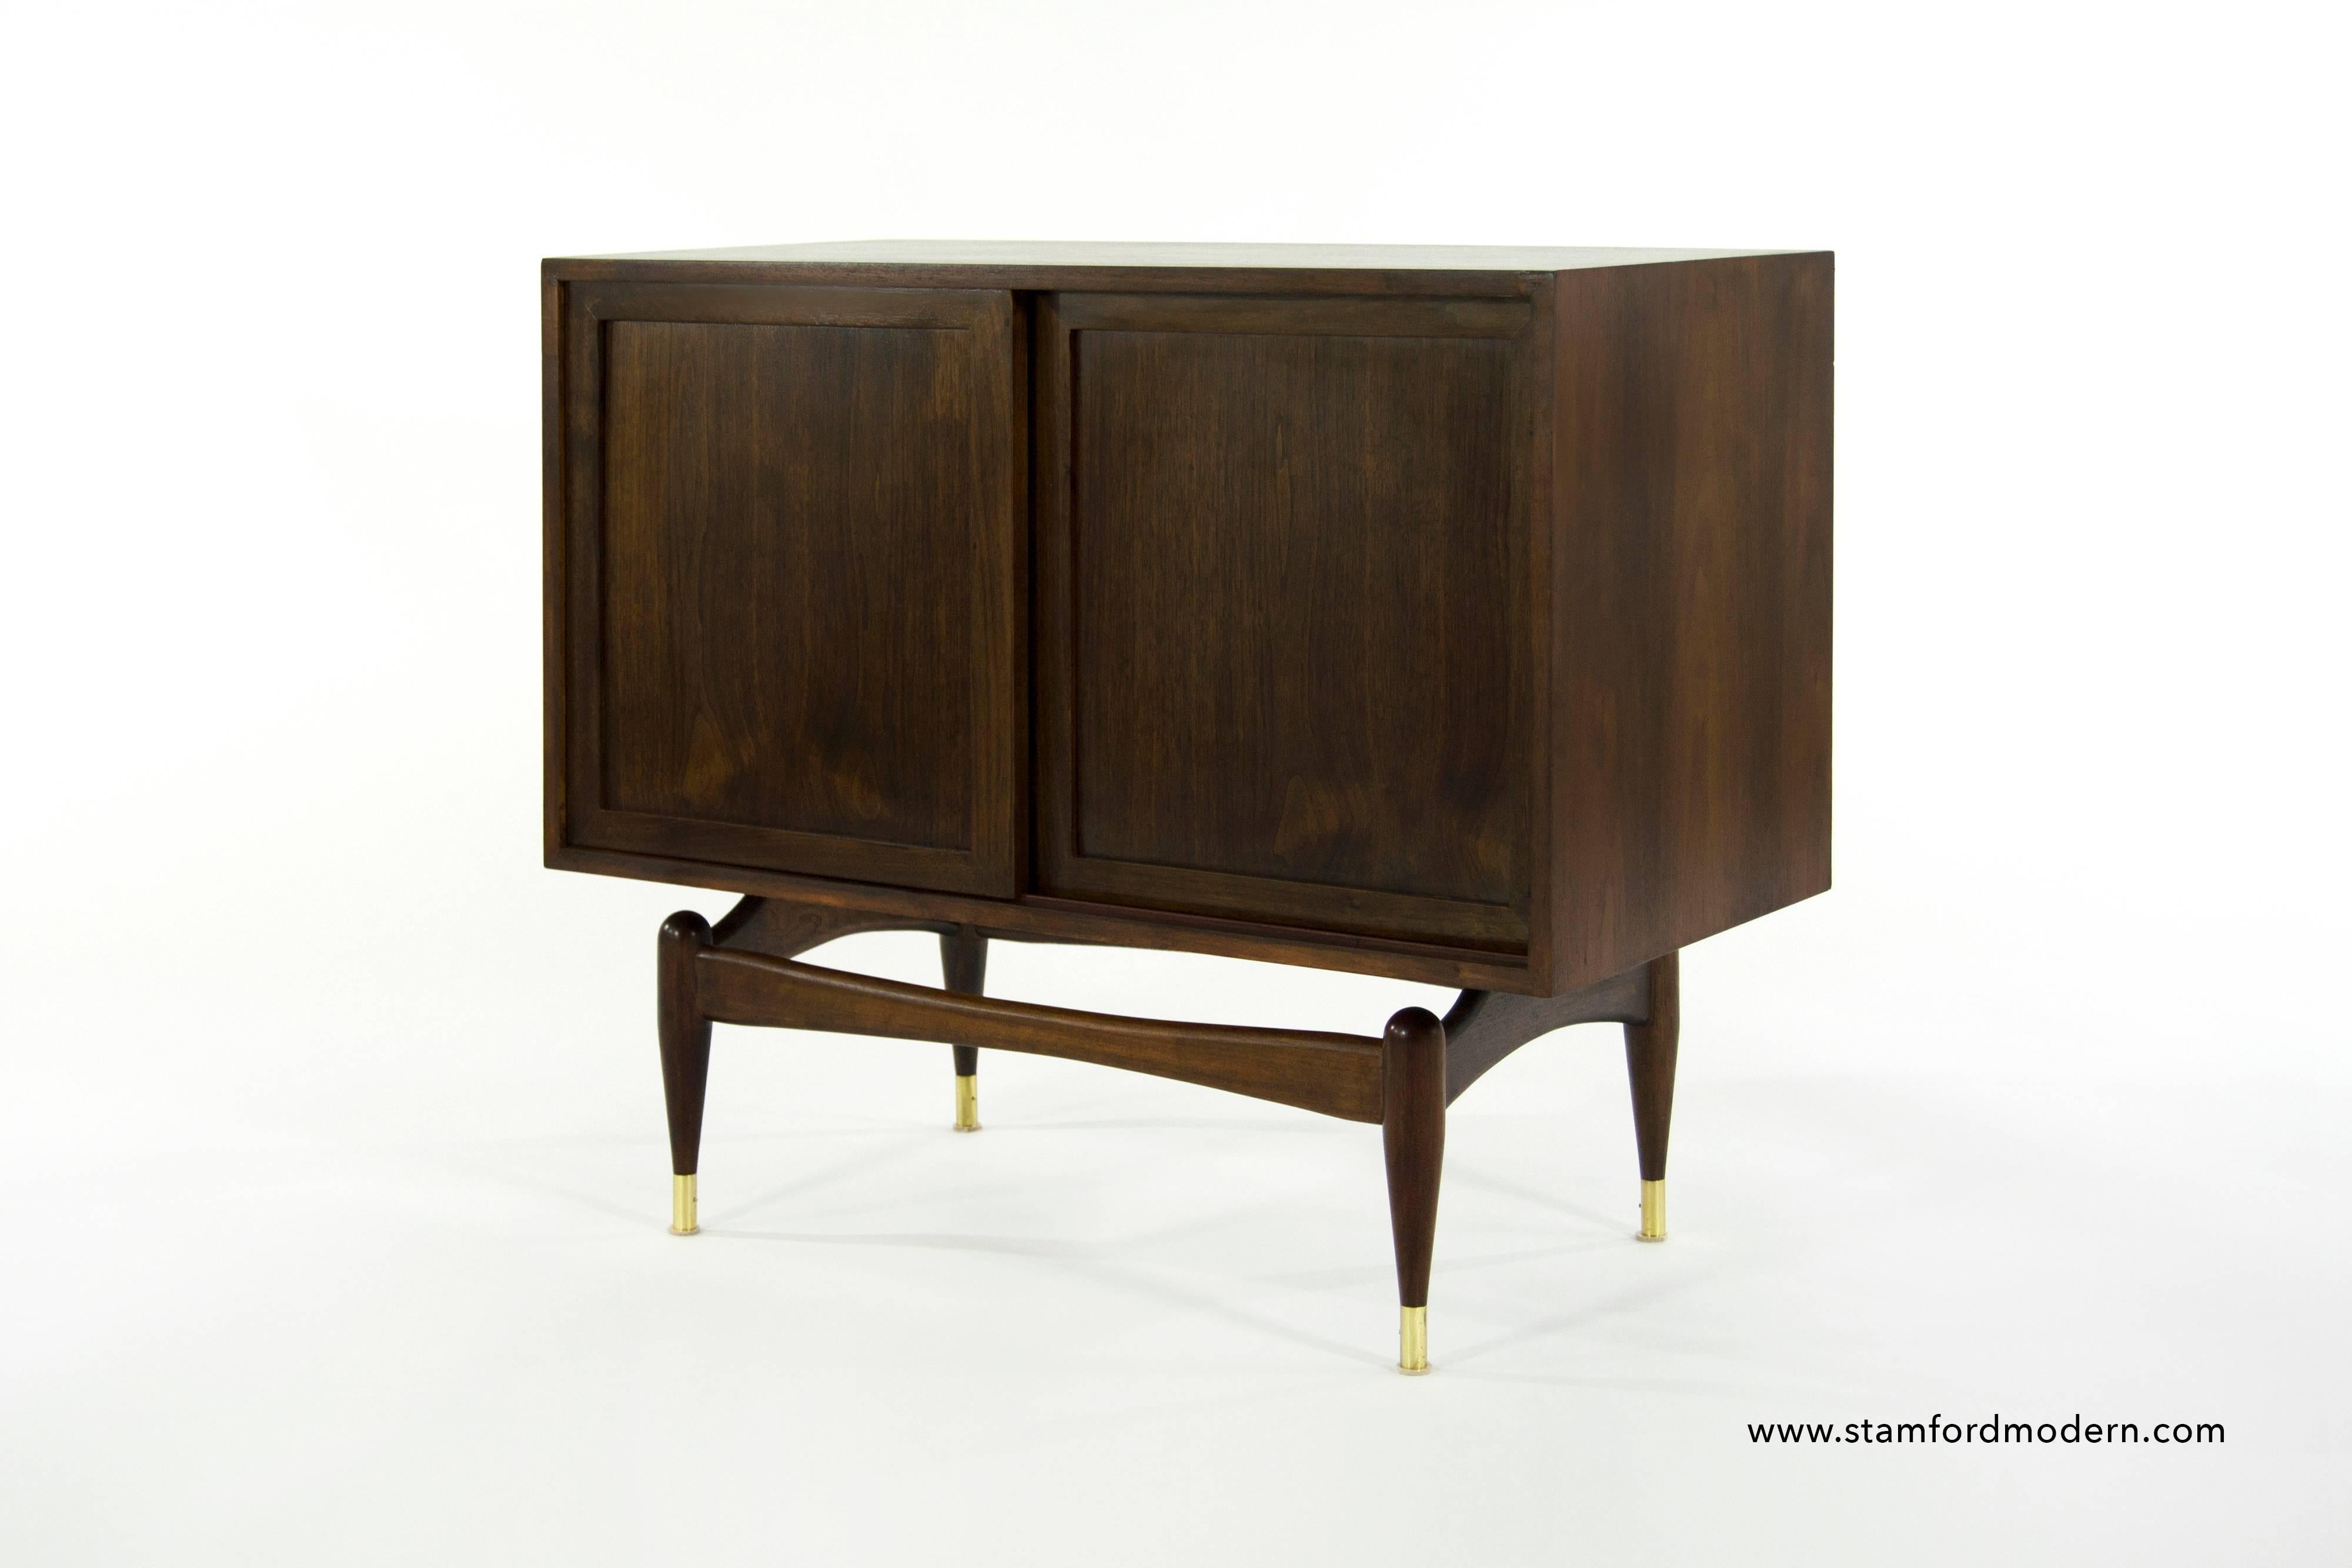 Fully restored walnut cabinet or console table, this very unusual piece features dual sliding doors which open up to reveal a single shelf as well as a sculptural form base with brass sabots.